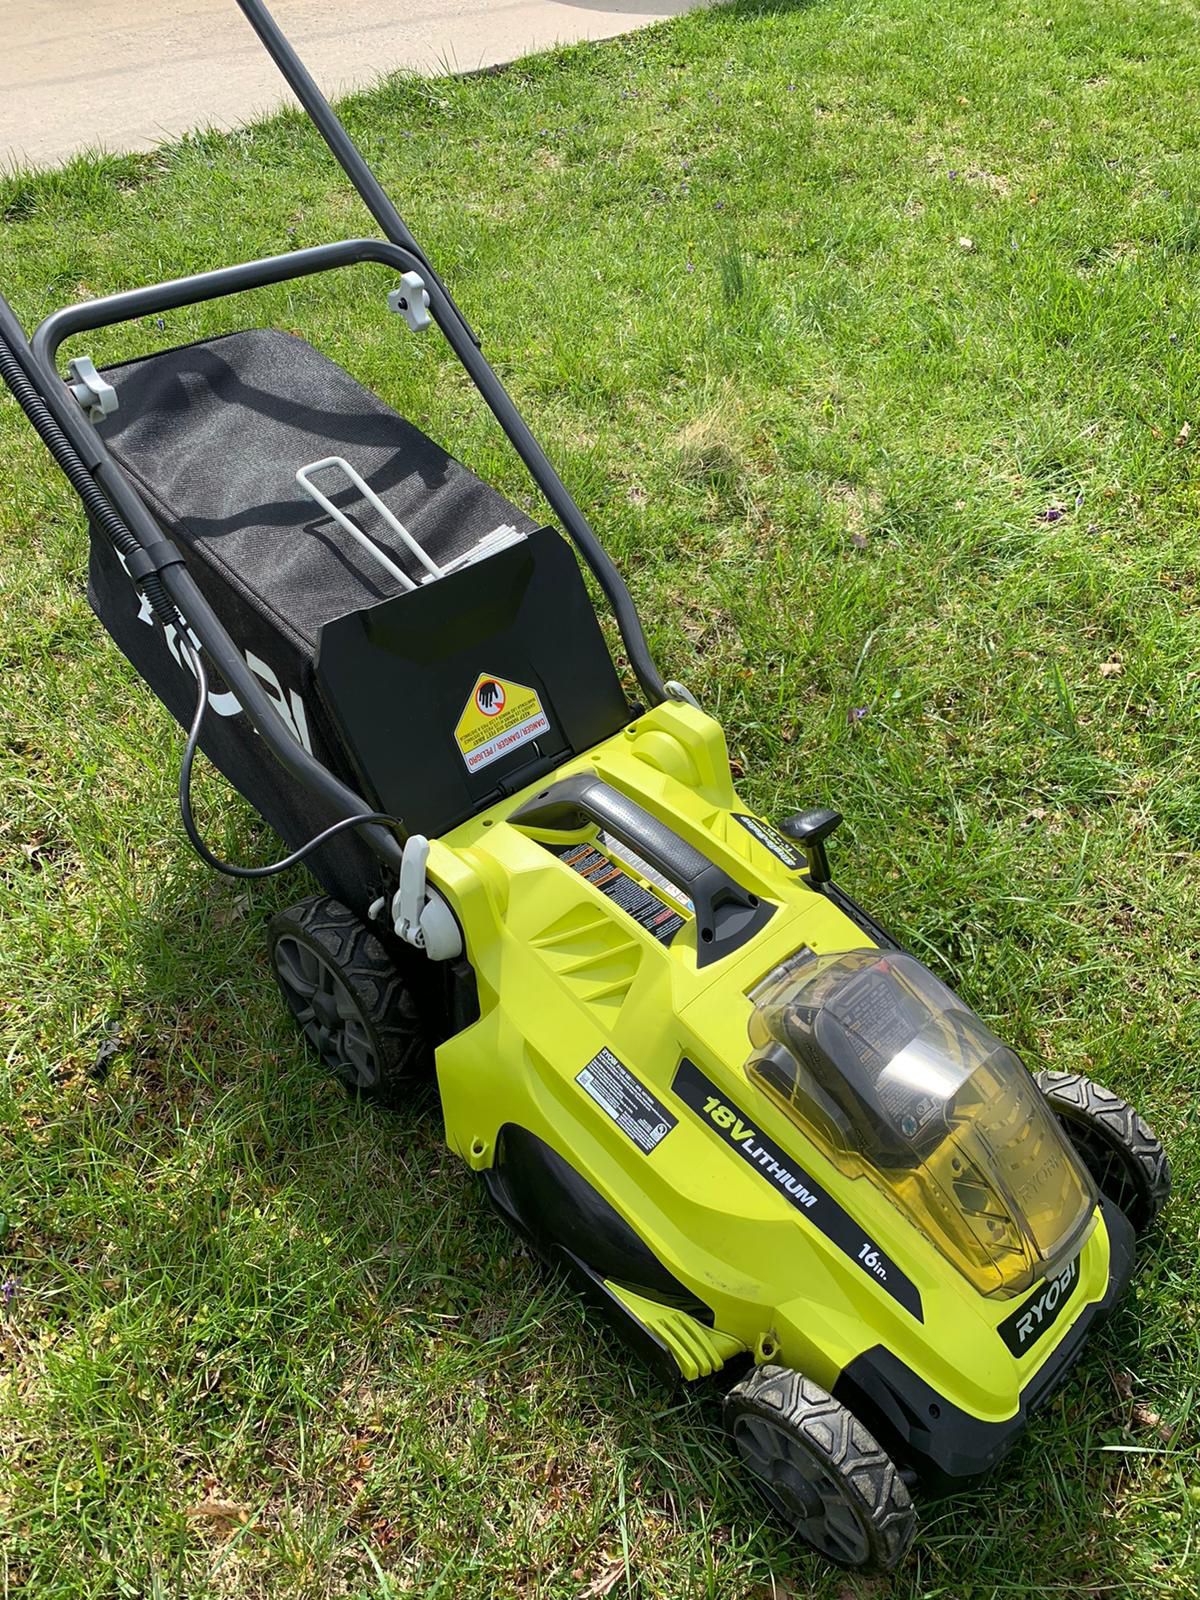 Fairly used Ryobi one+ lawn mower 16in. 18 lithium cordless battery with 2 rechargeable batteries